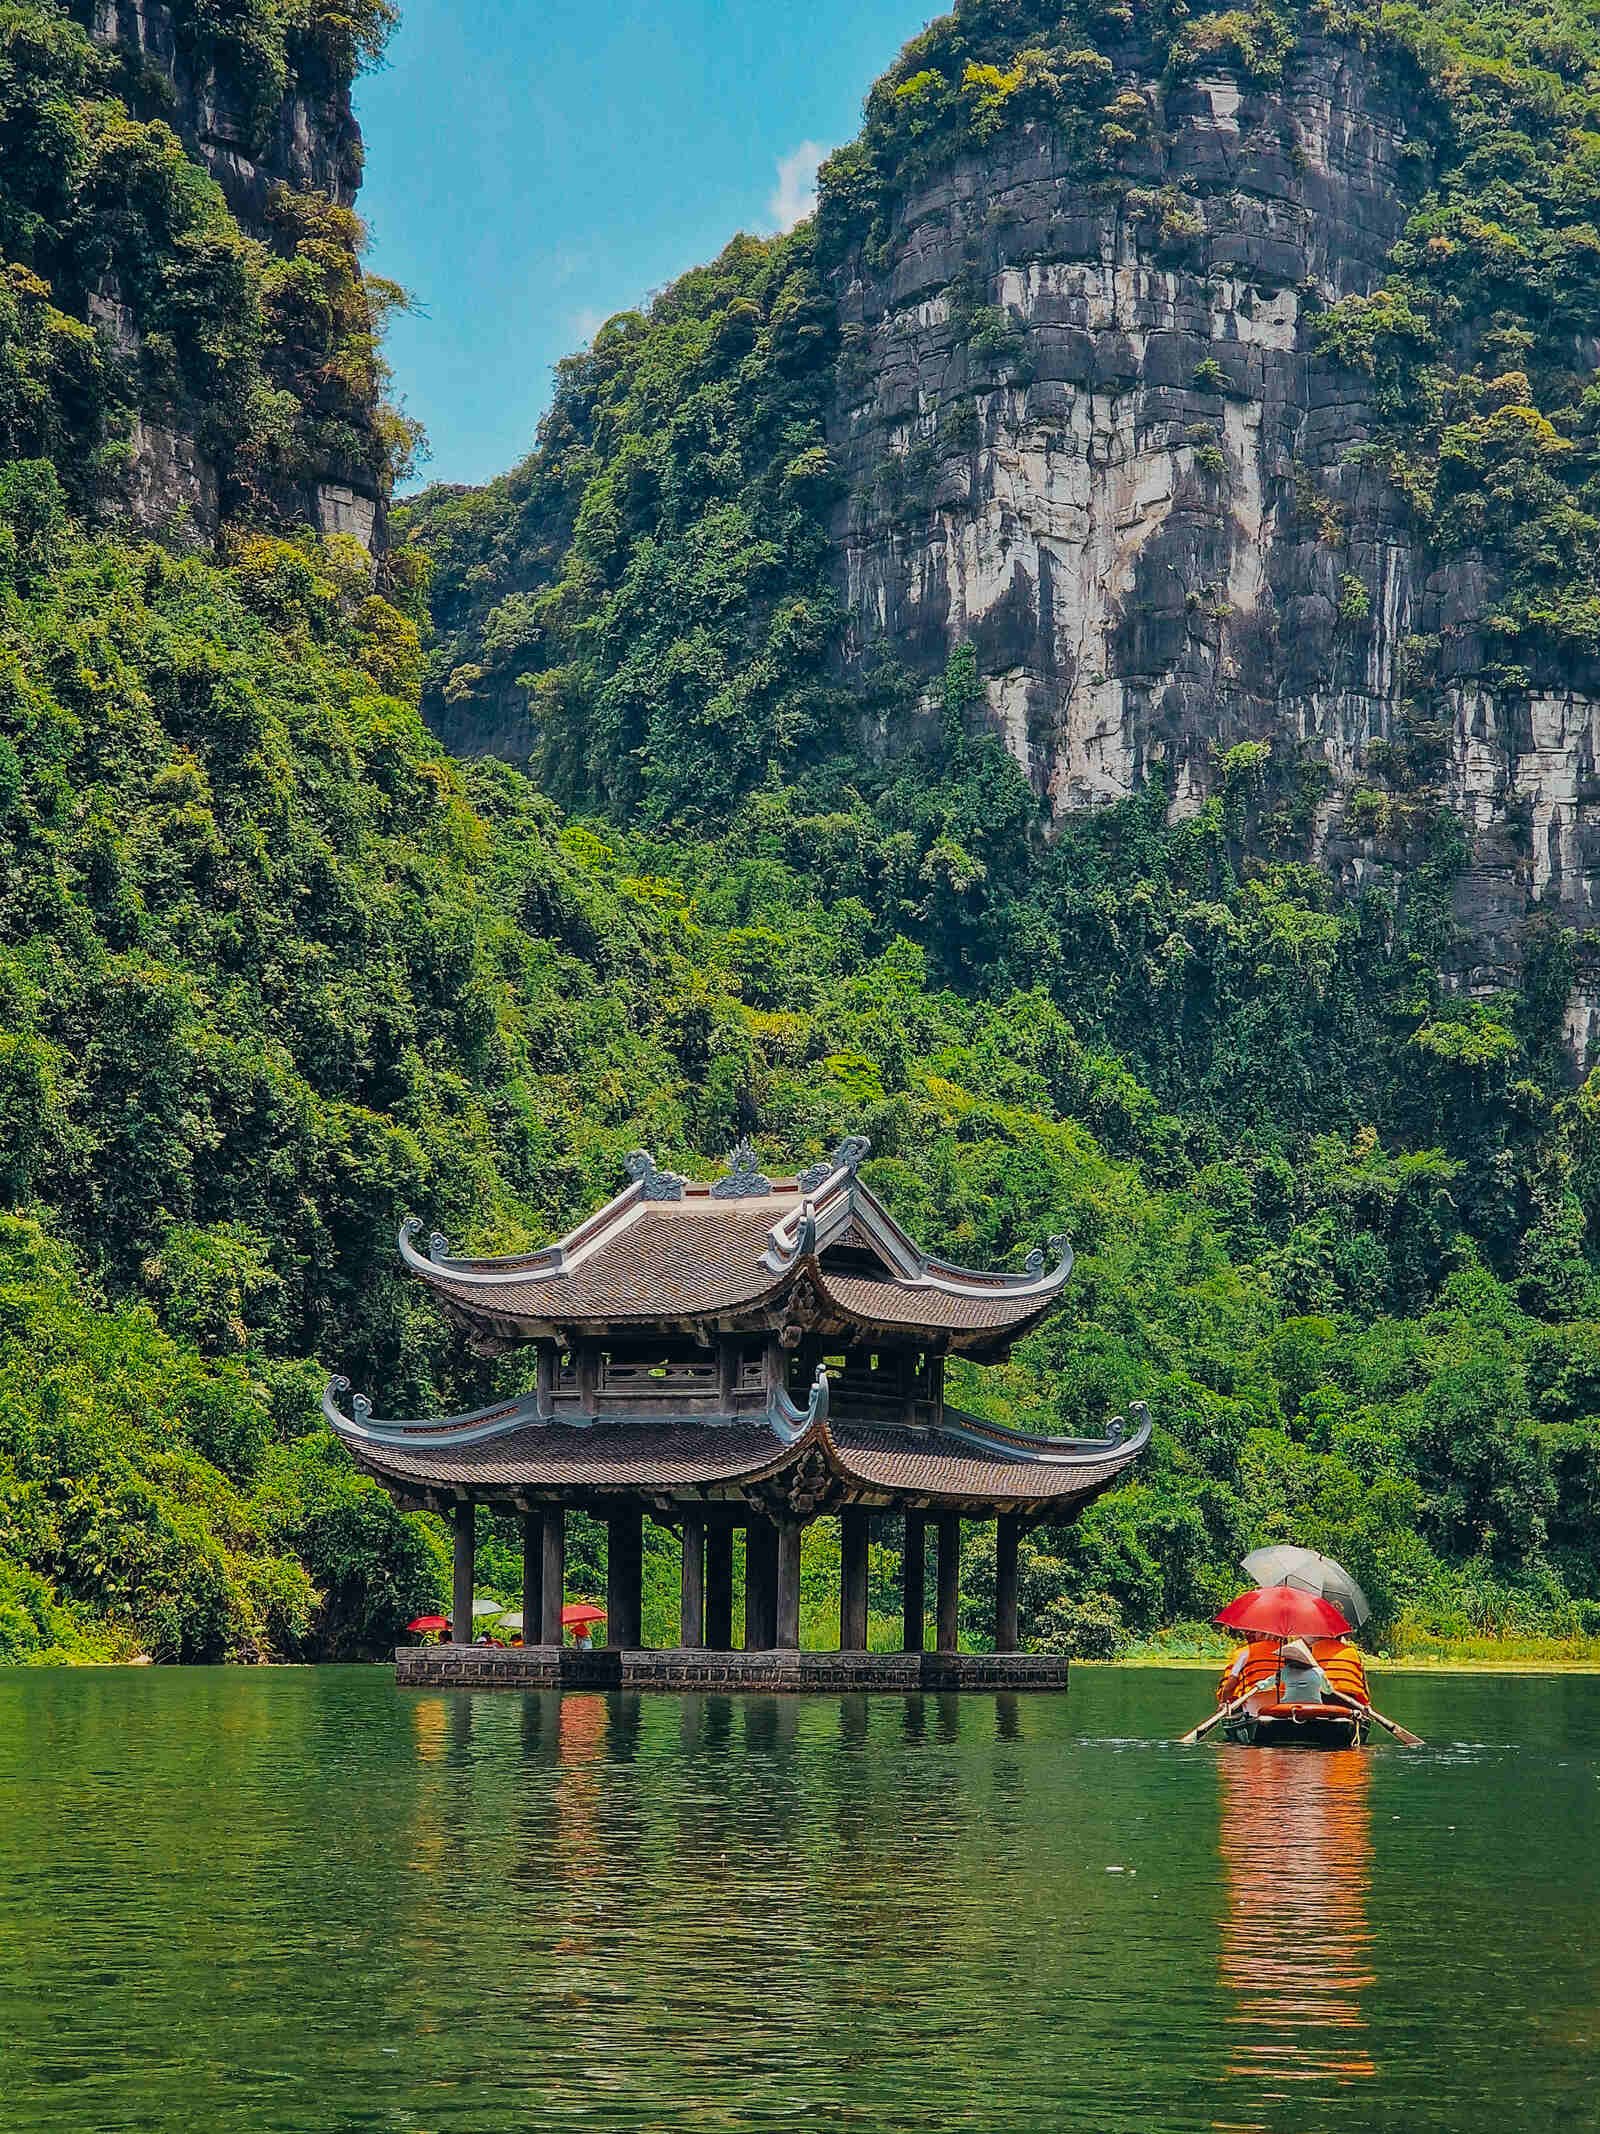 a wooden pagoda in the middle of a waterway surrounded by grren cliff faces. A small boat with red umbrellas in it rows past the pagoda